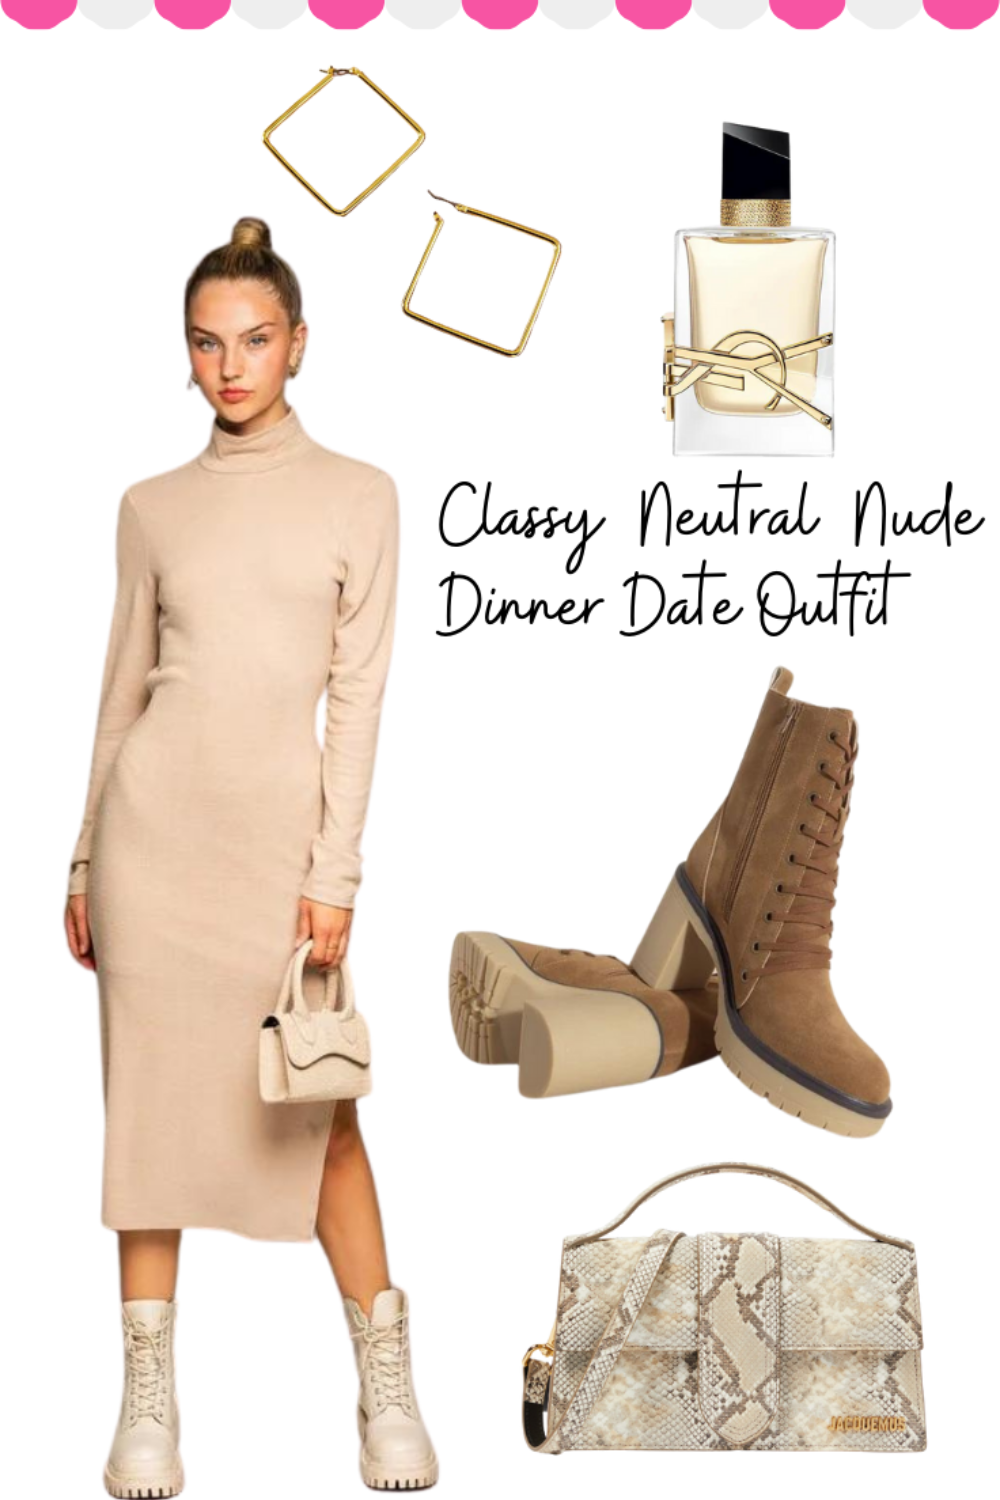 Classy Neutral Nude Dinner Date Outfit